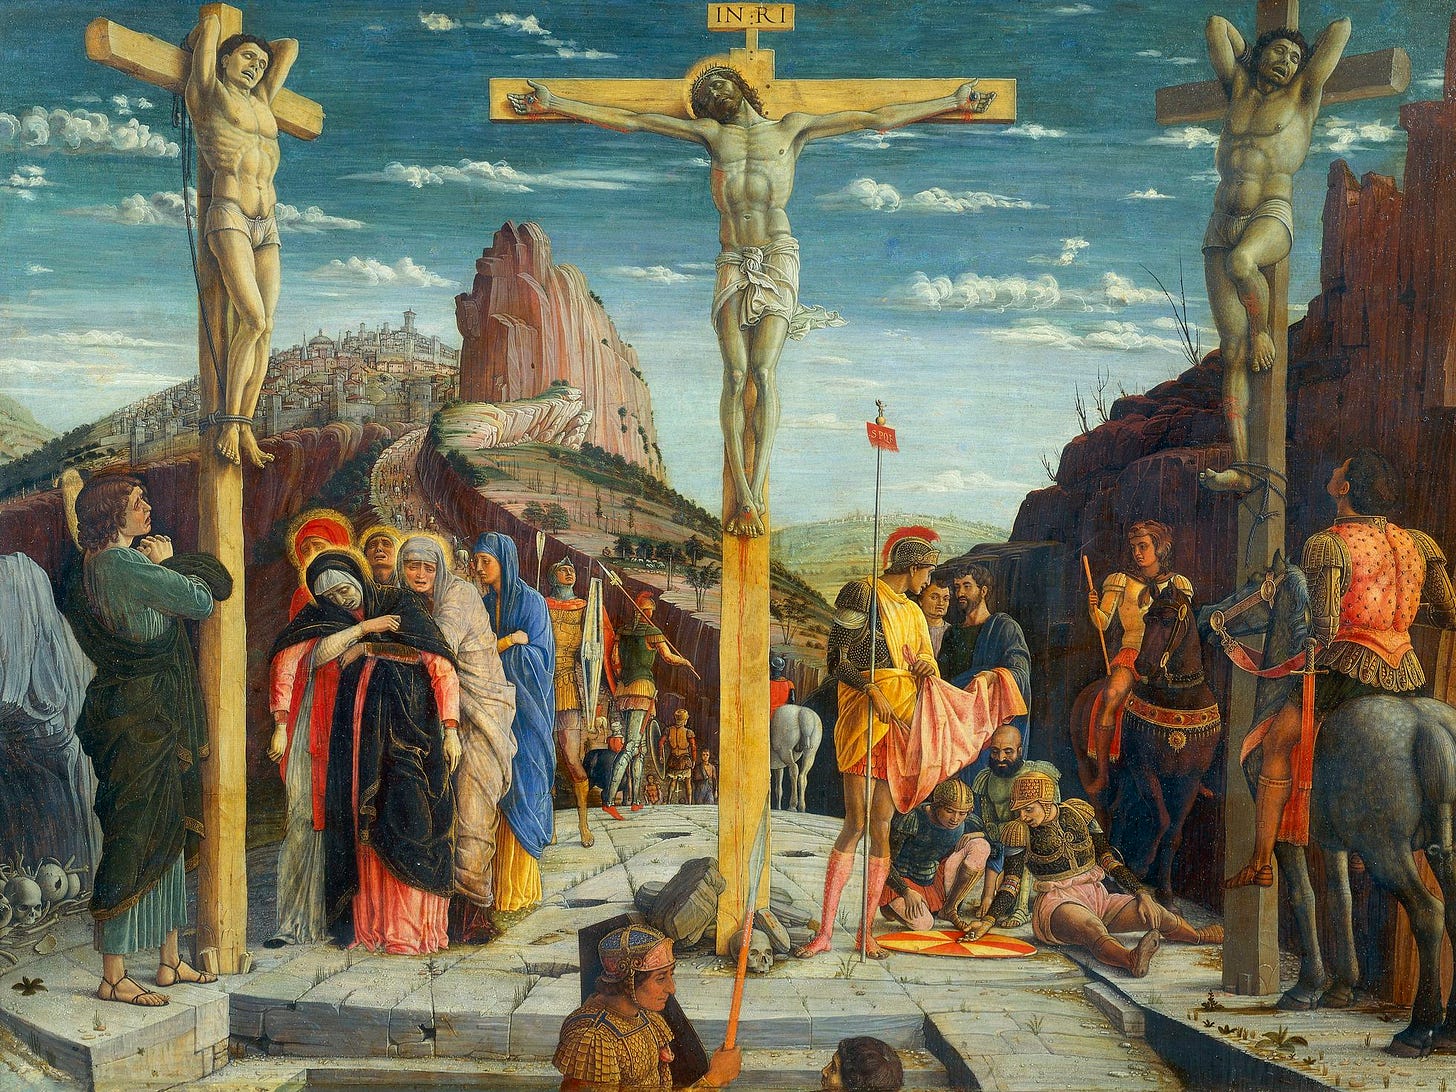 Holy Week: The forgotten men crucified with Jesus at Golgotha | Culture |  EL PAÍS English